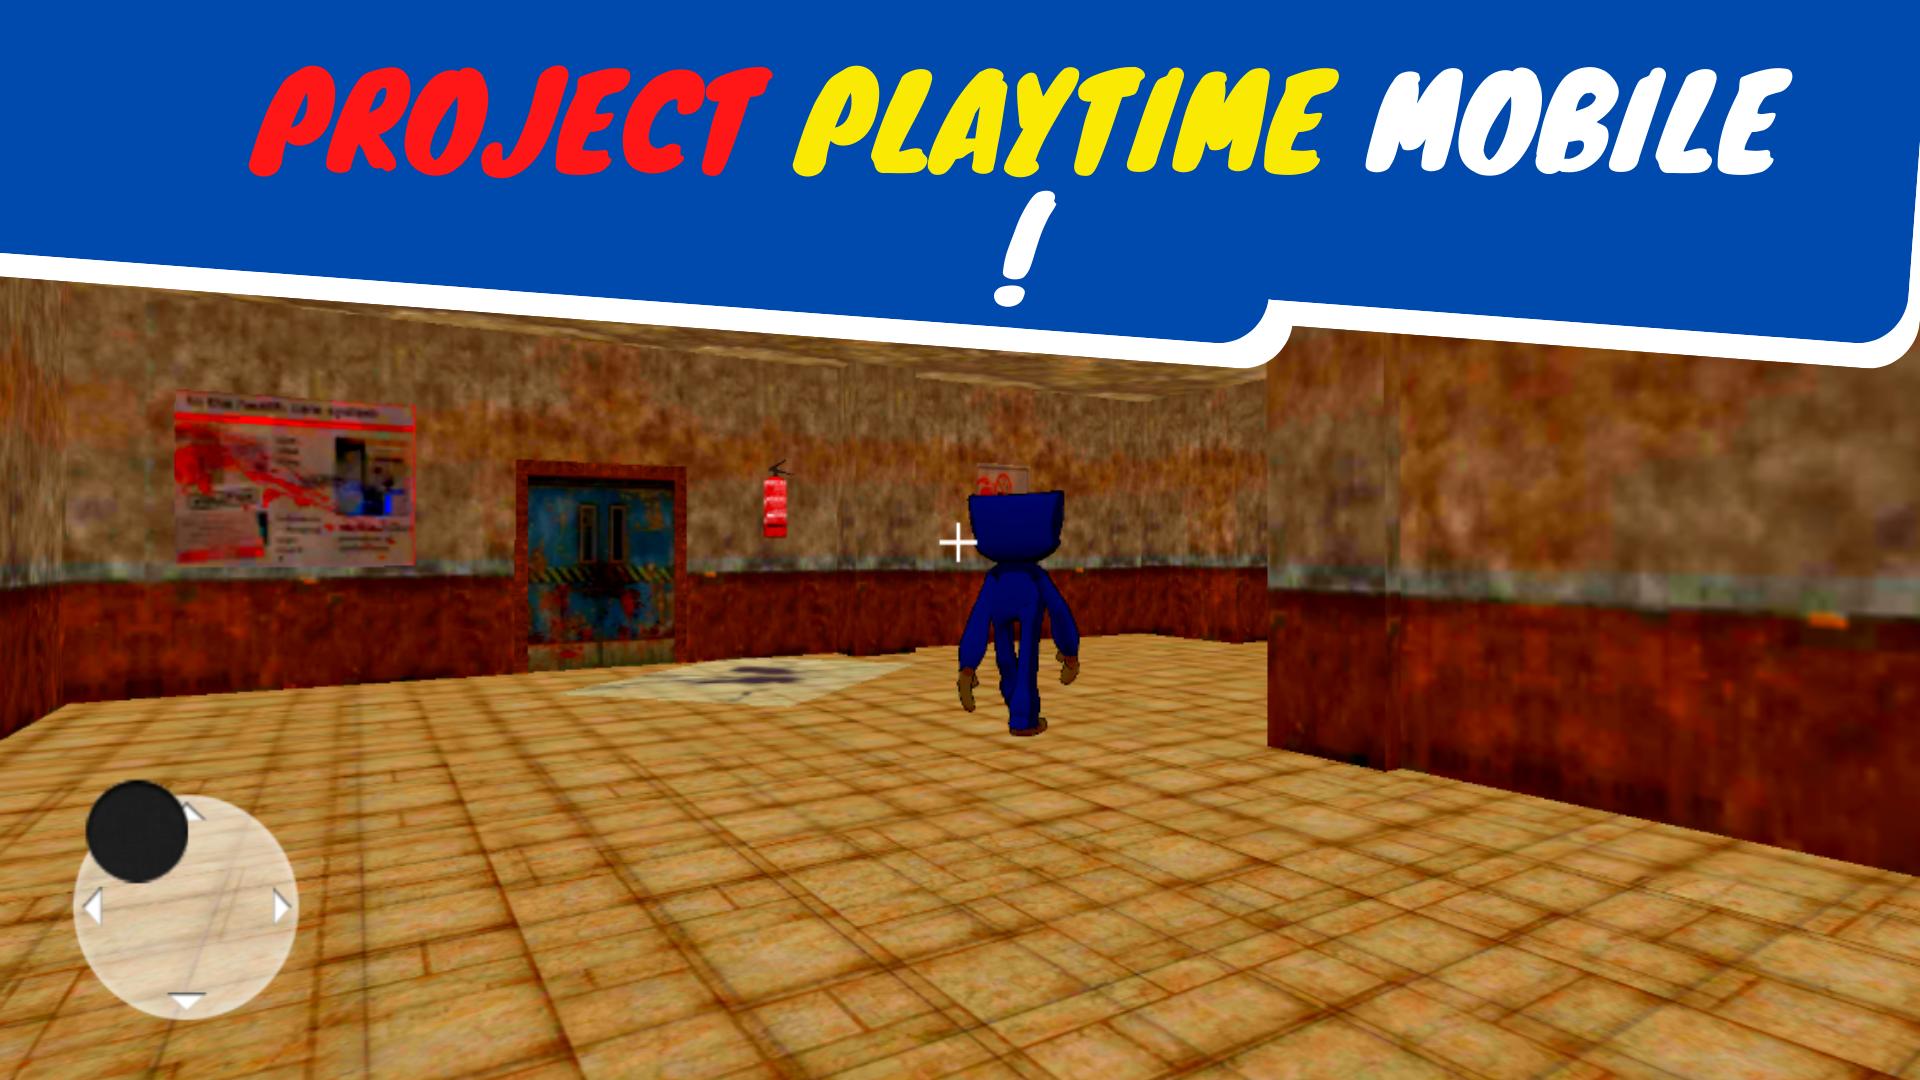 Project playtime game. Проджект Плейтайм. Boxy Boo. Project Playtime mobile.